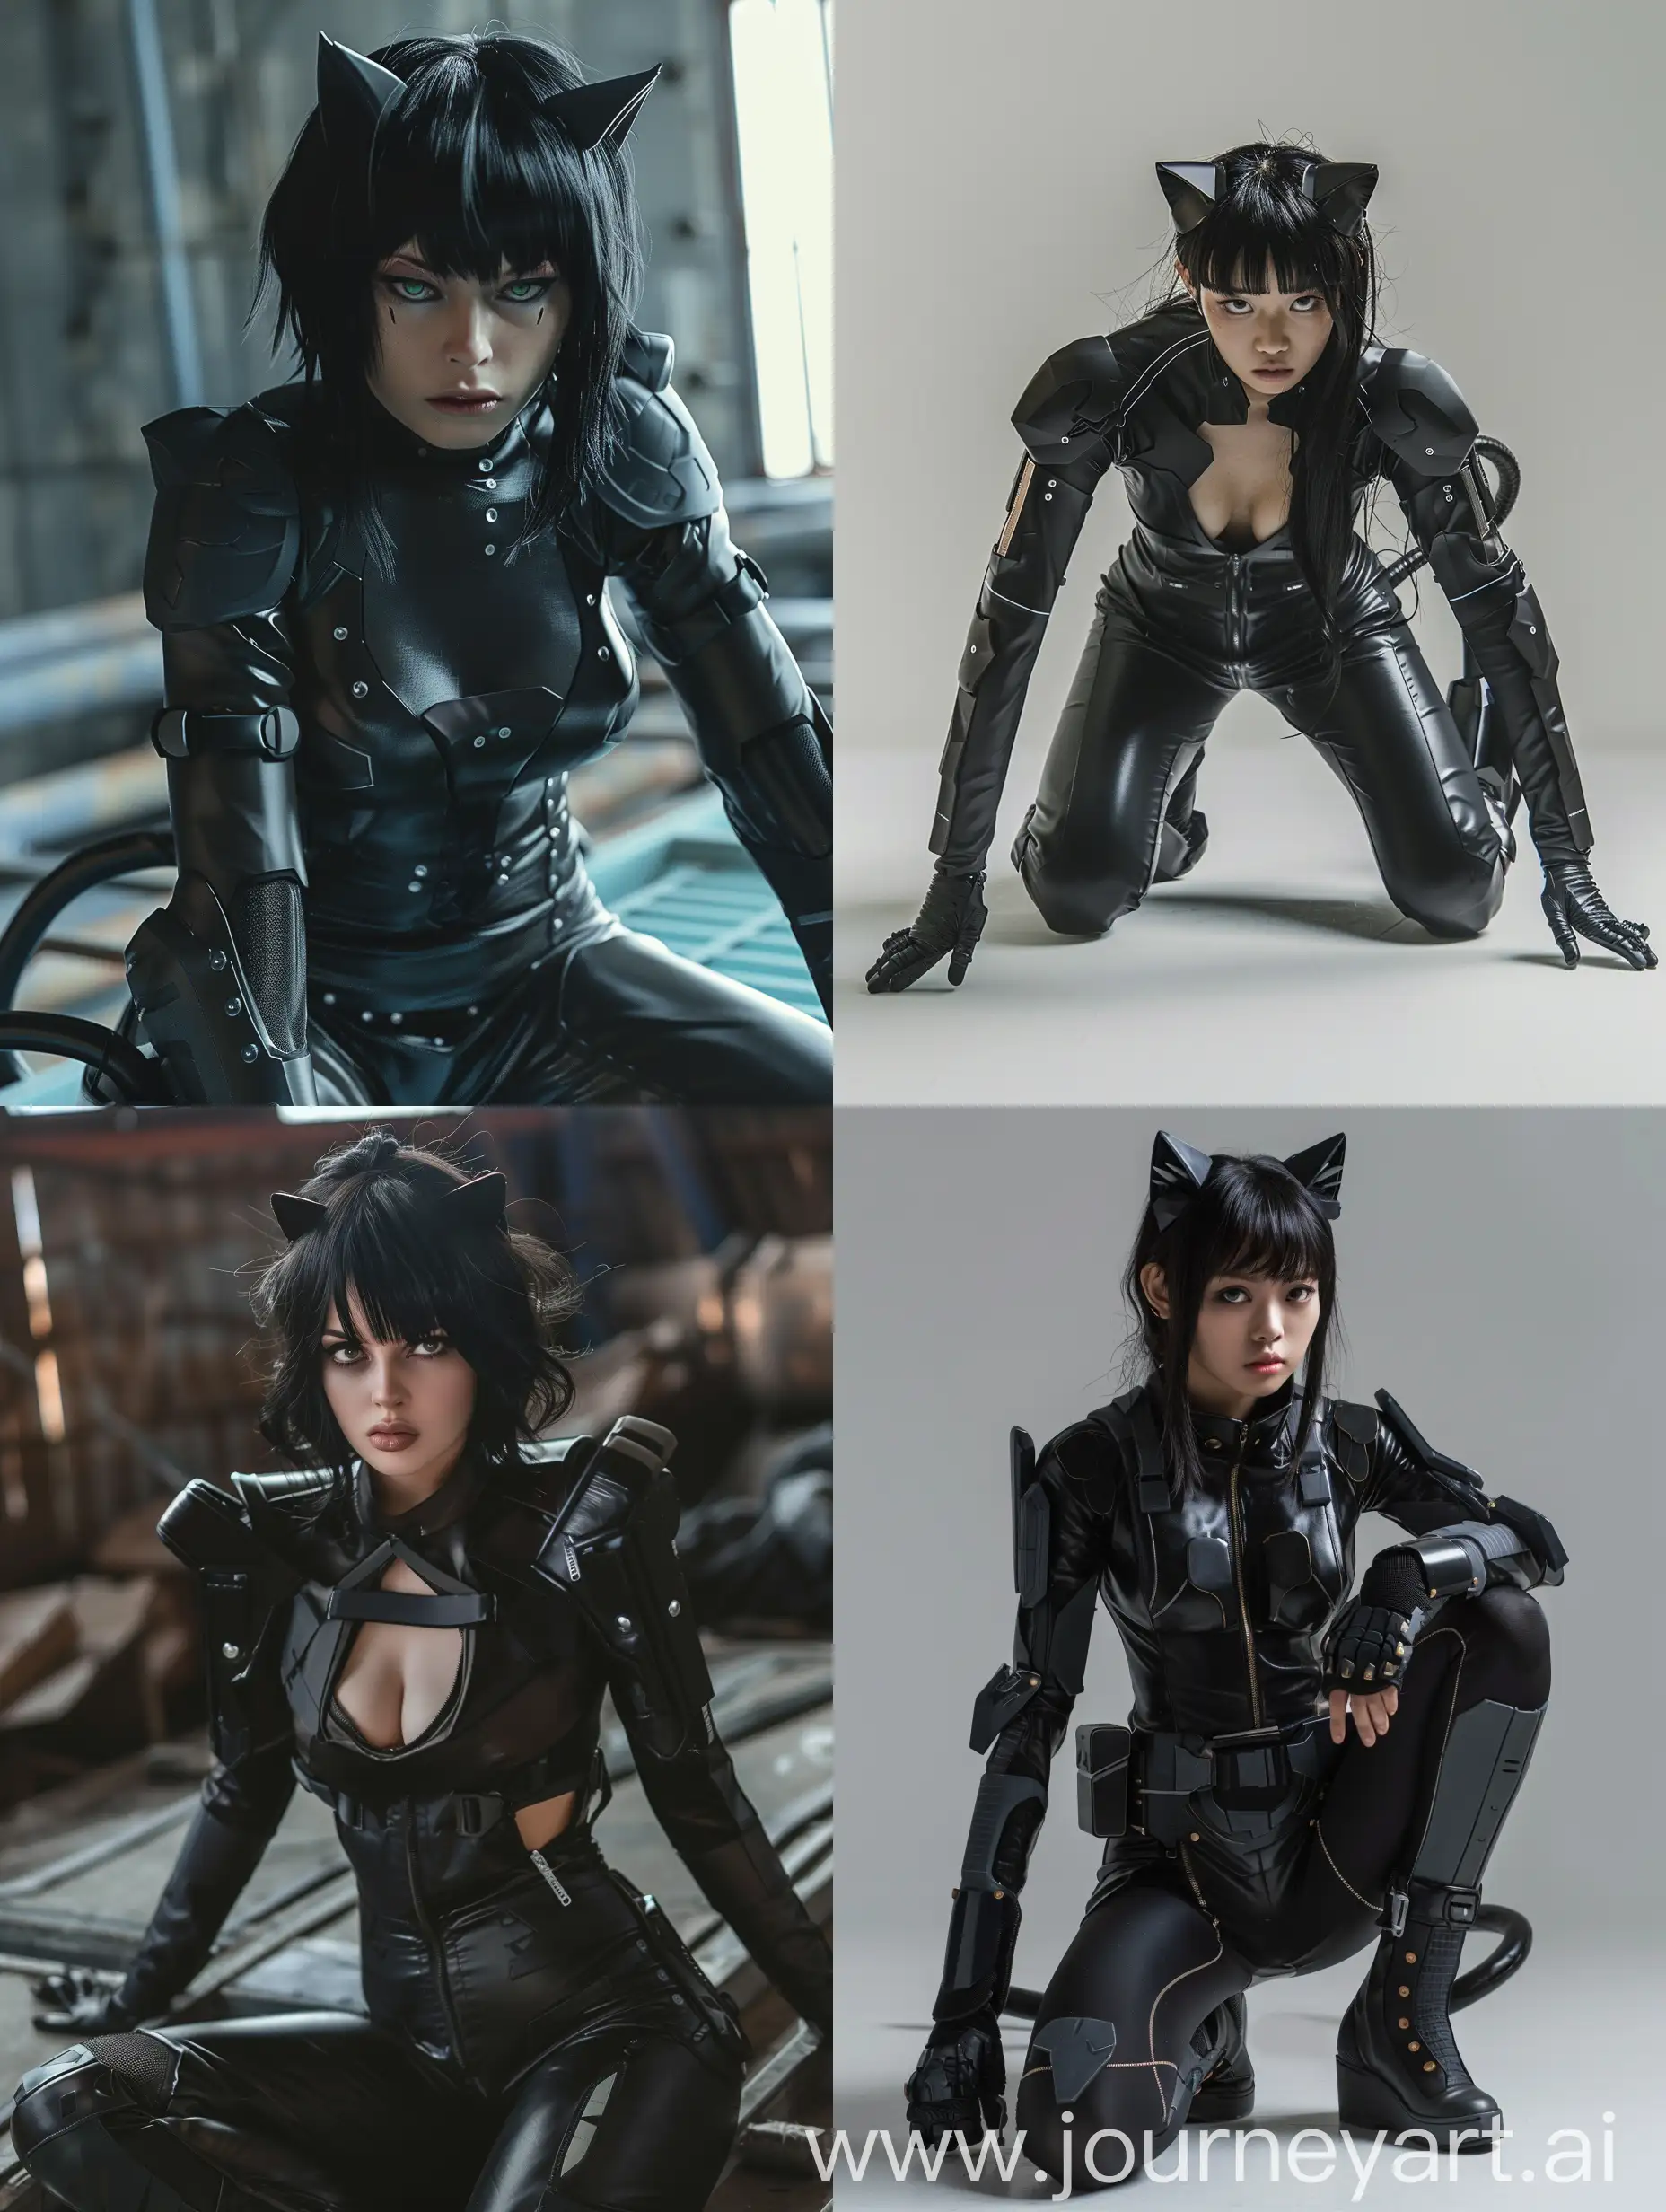 style attractive  girl character wearing tight cat suit with minimal futuristic pieces of armor Inspired by the female lead in ghost in the shell attractive dynamic pose Dynamic camera angle